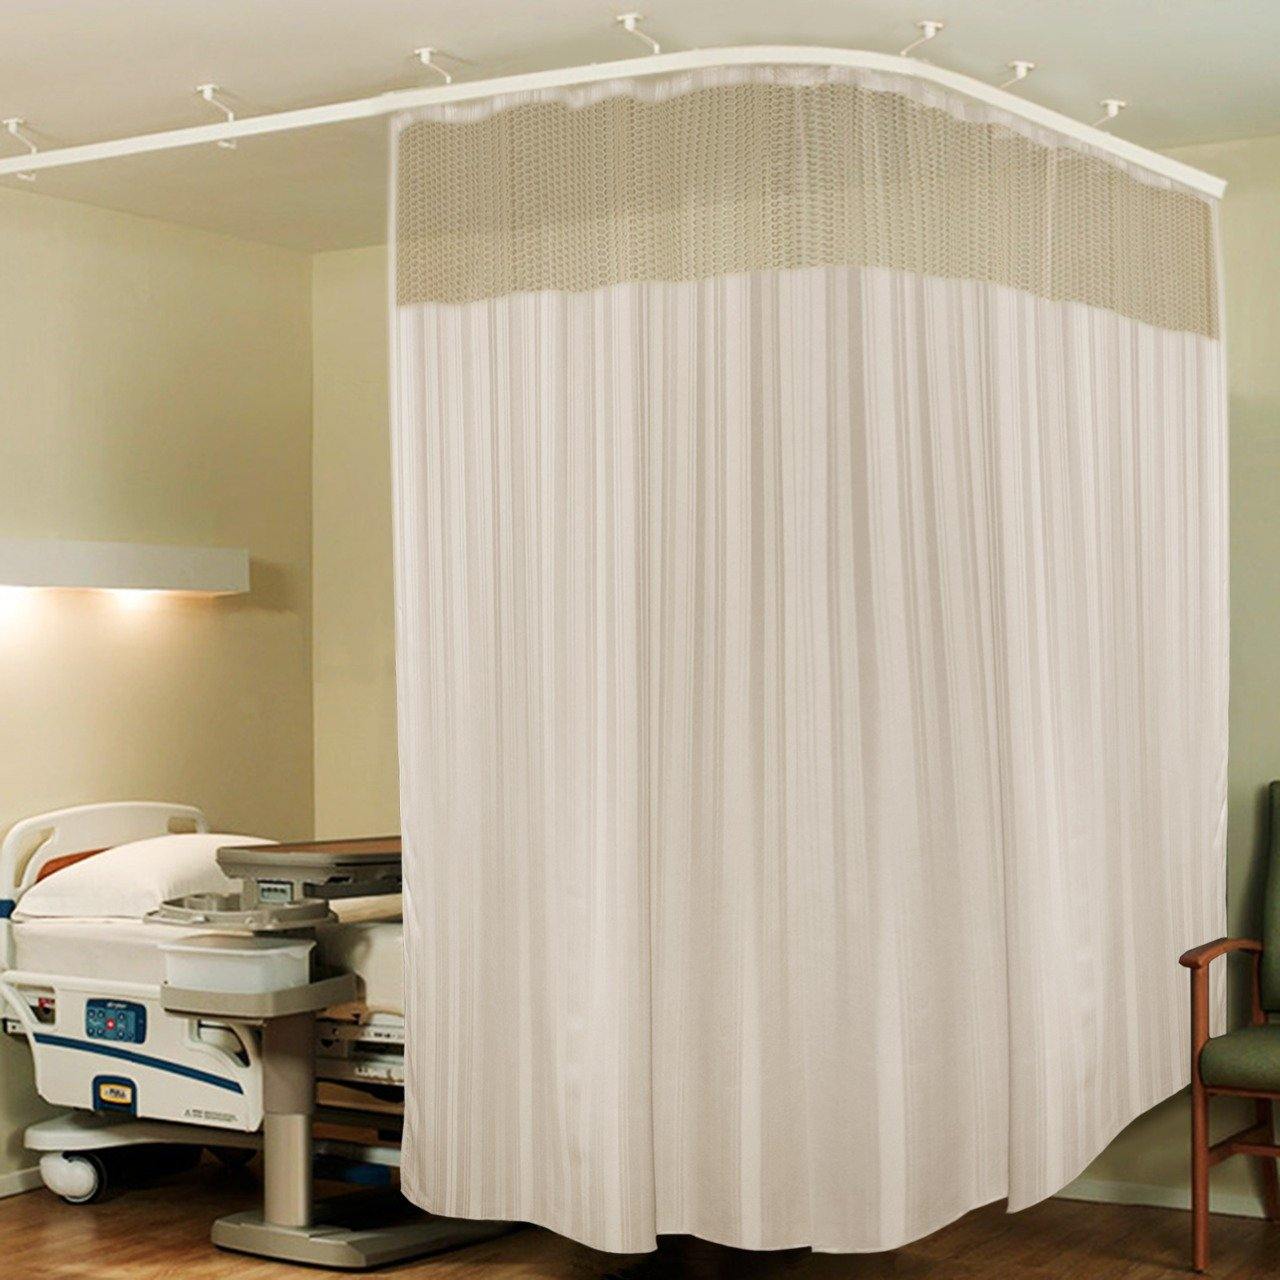 Lushomes Cream Full Sized Hospital ICU Bed Curtain with 16 Eyelets and 16 C-Hooks and Net(8Ft x 7Ft, 2 Panels Attached) - Lushomes